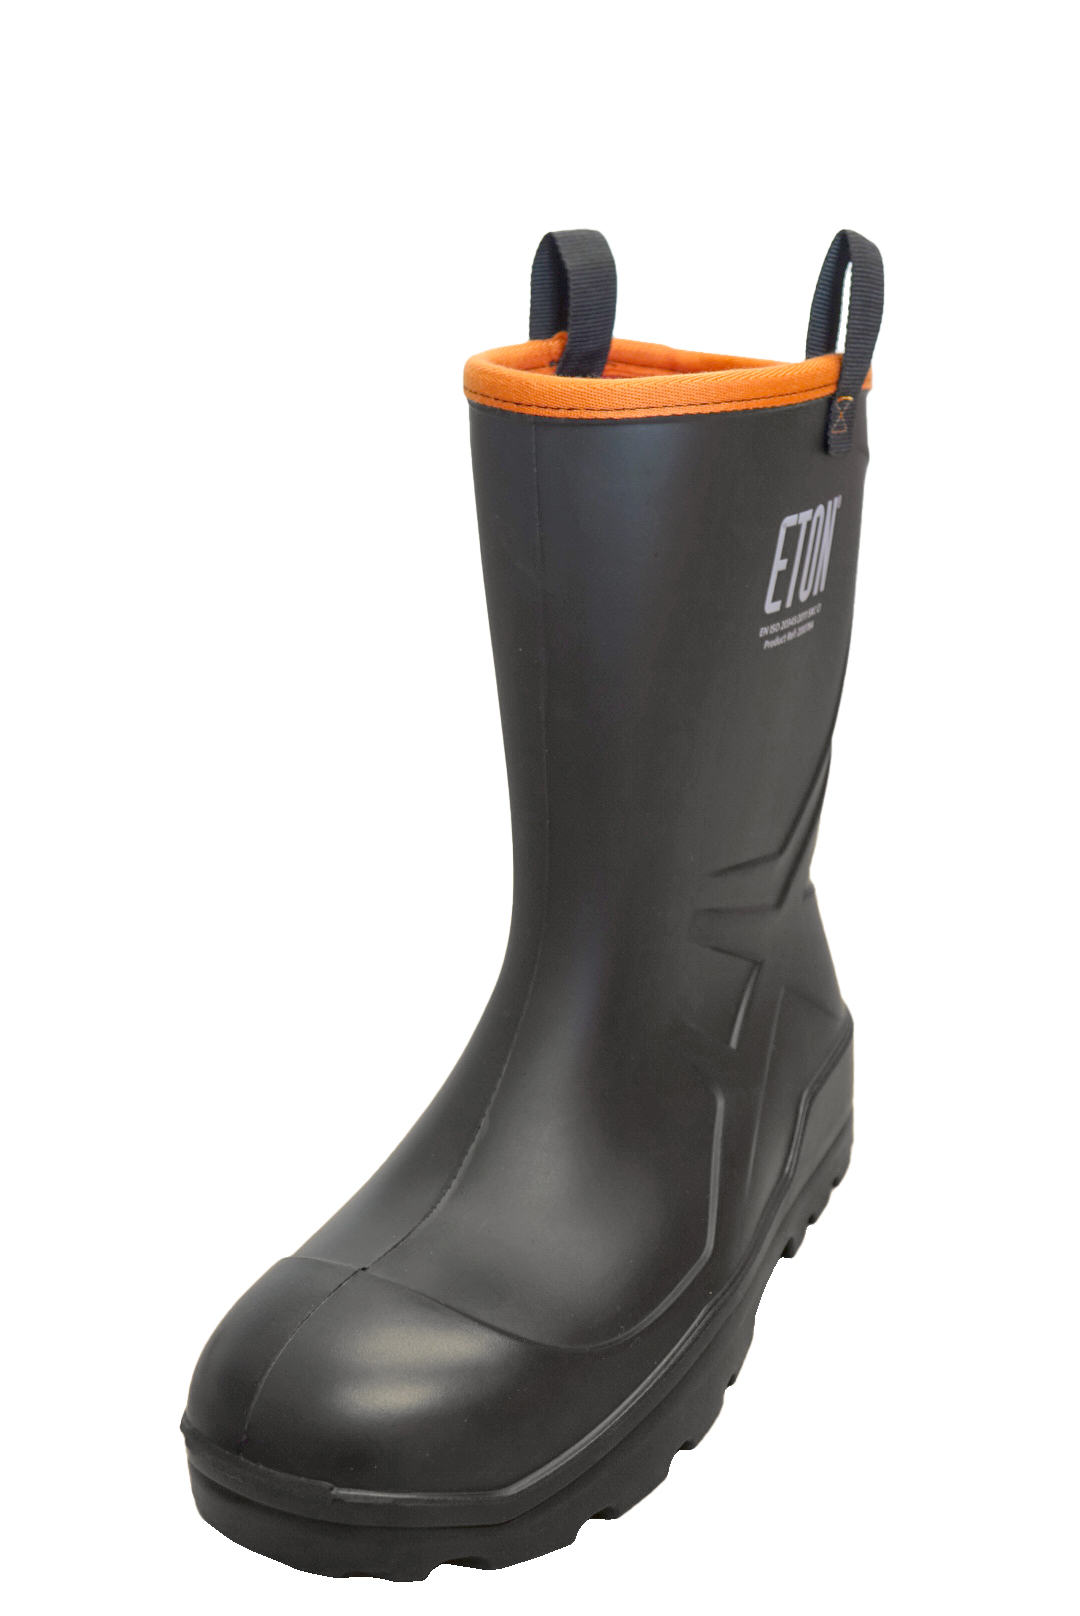 PU Rigger Steel Full Safety Wellington - Size 11